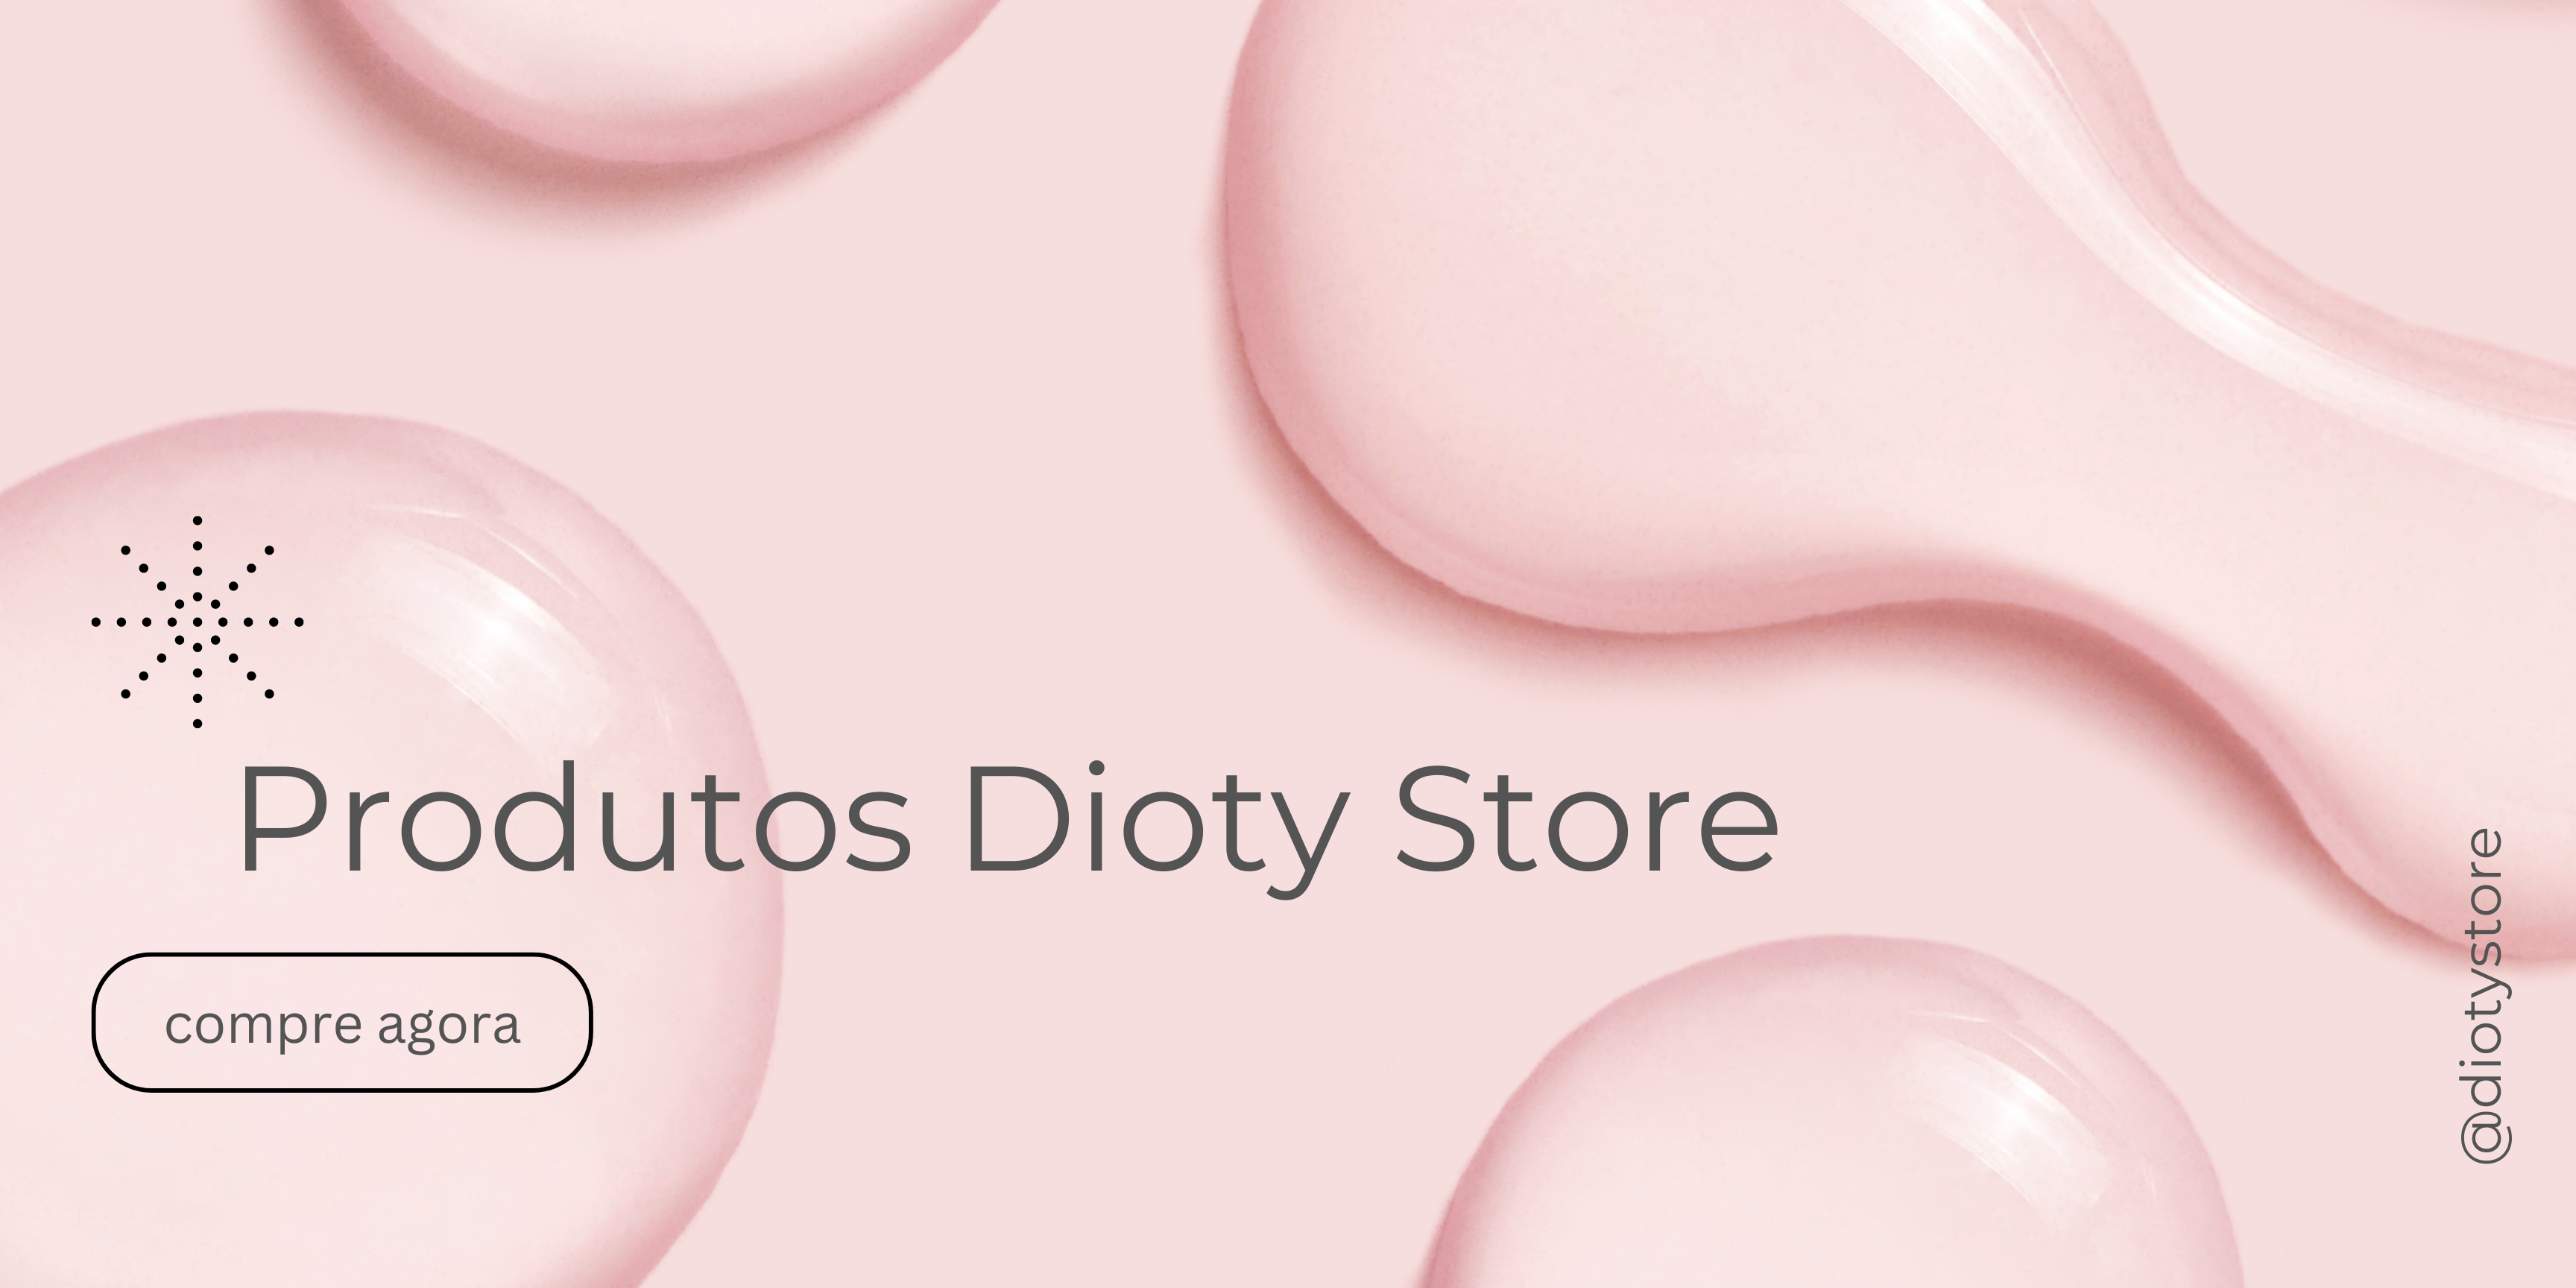 Dioty Store